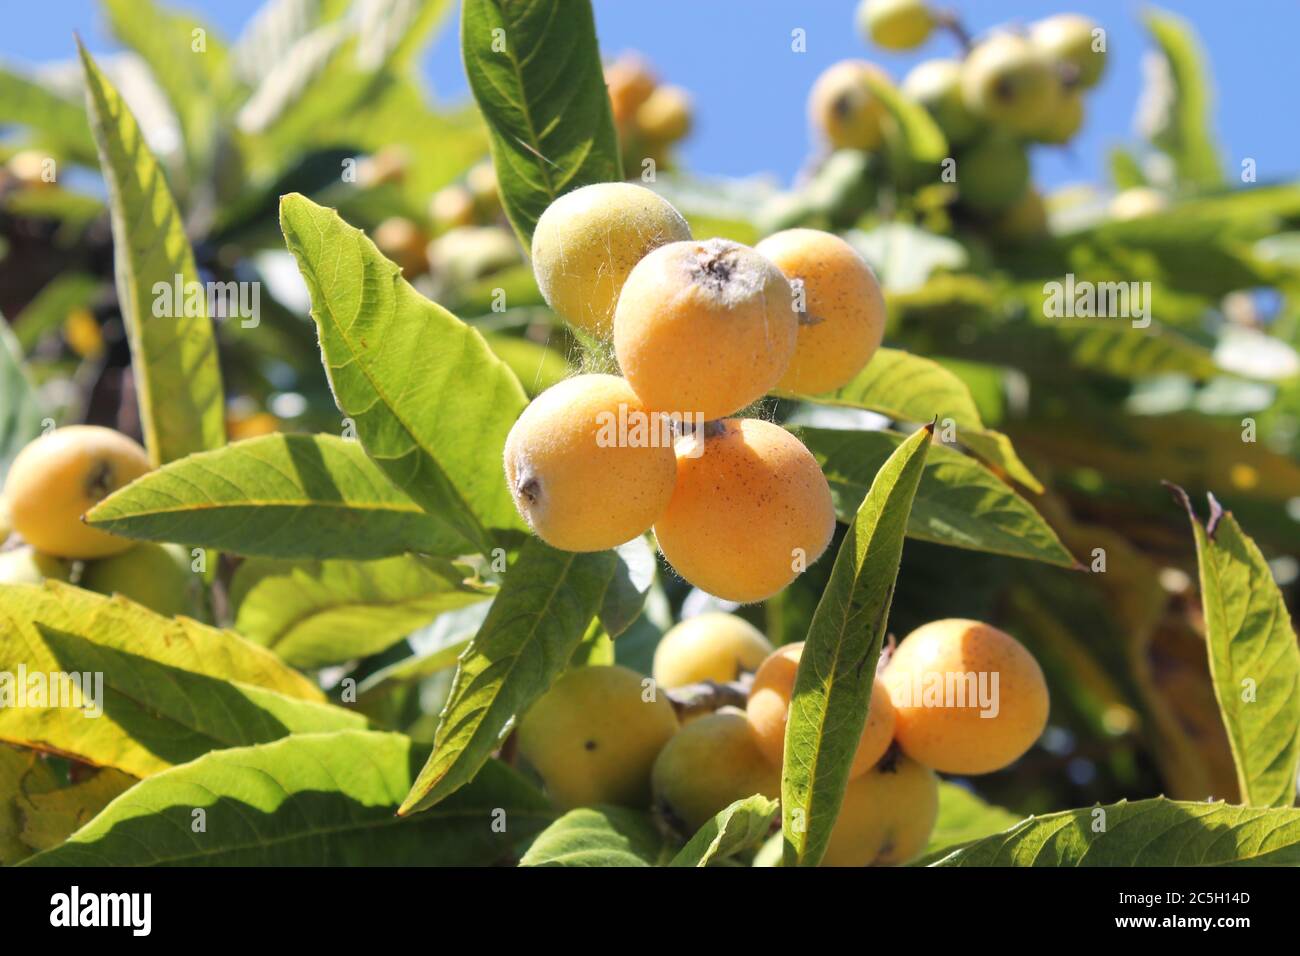 loquat(Eriobotrya japonica) fruit on loquat plant with a wonderful view of fruit plant Stock Photo